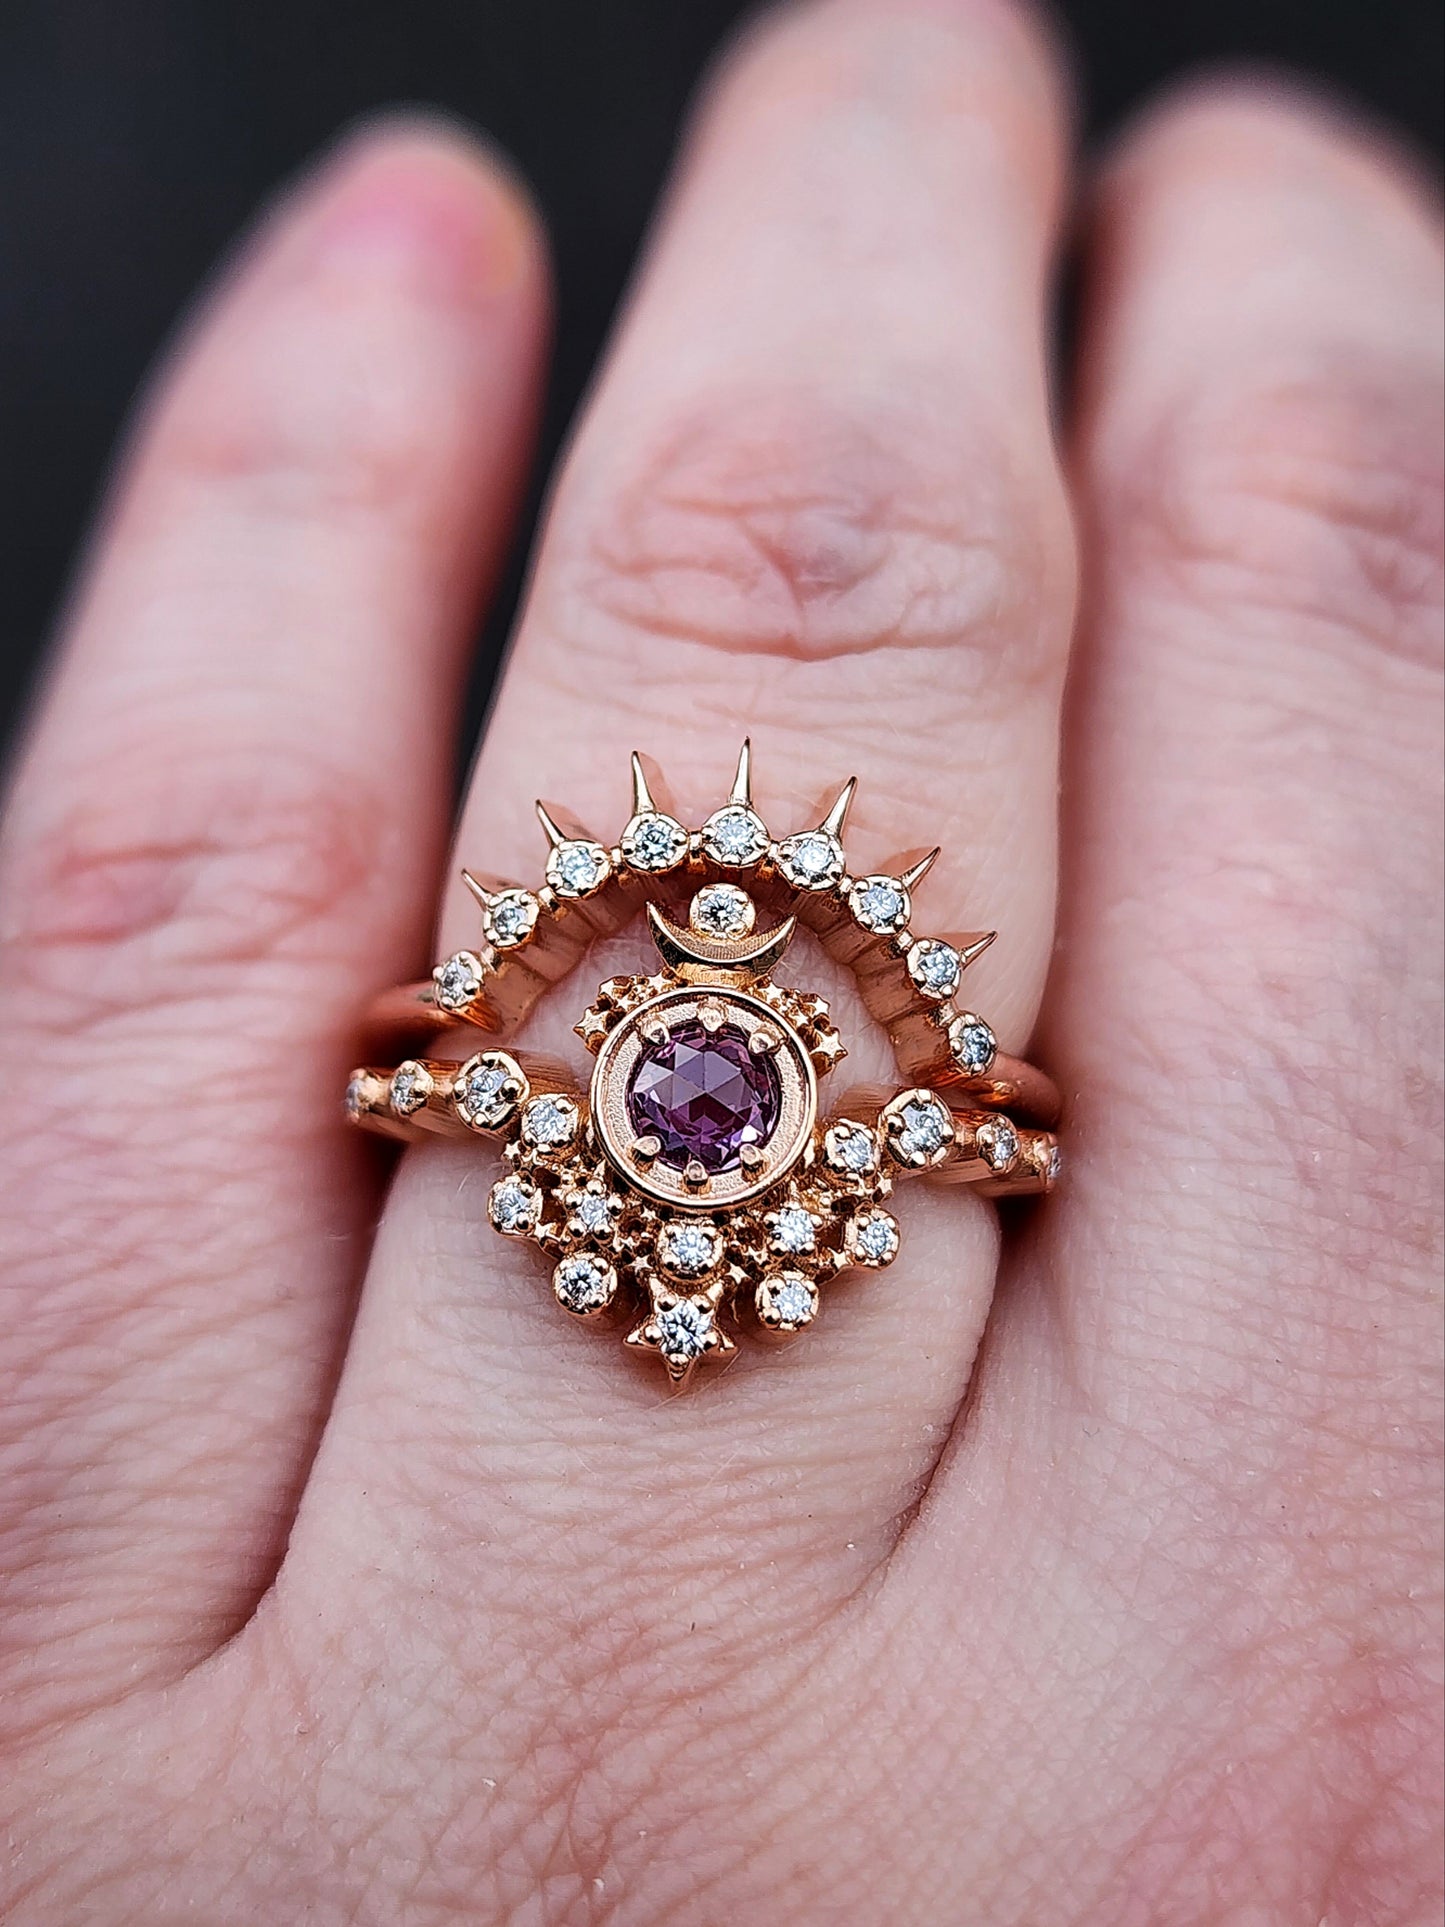 Ready to Ship Size 6-8 - Rose Cut Purple Sapphire Moon Witch Engagement Ring Set with Diamonds and Stardust - 14k Rose Gold - Celestial Lunar Wedding Ring Set